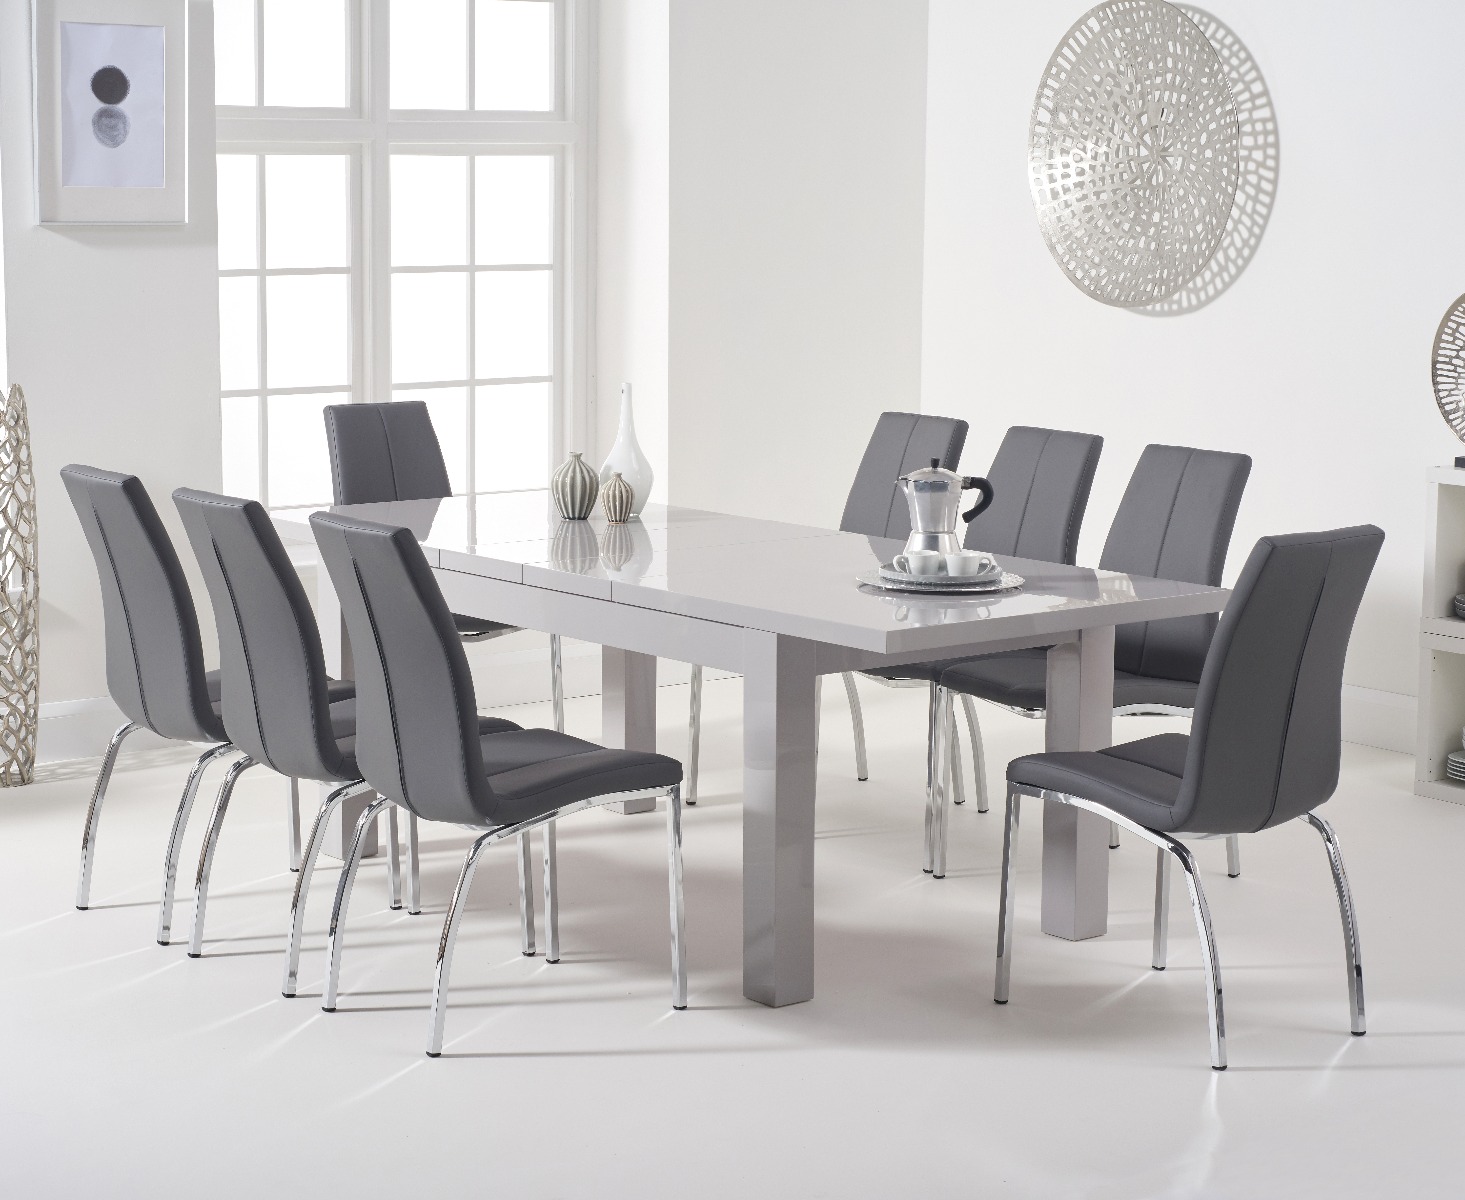 Extending Atlanta Light Grey Gloss 160220cm Dining Table With 4 Ivory White Marco Chairs